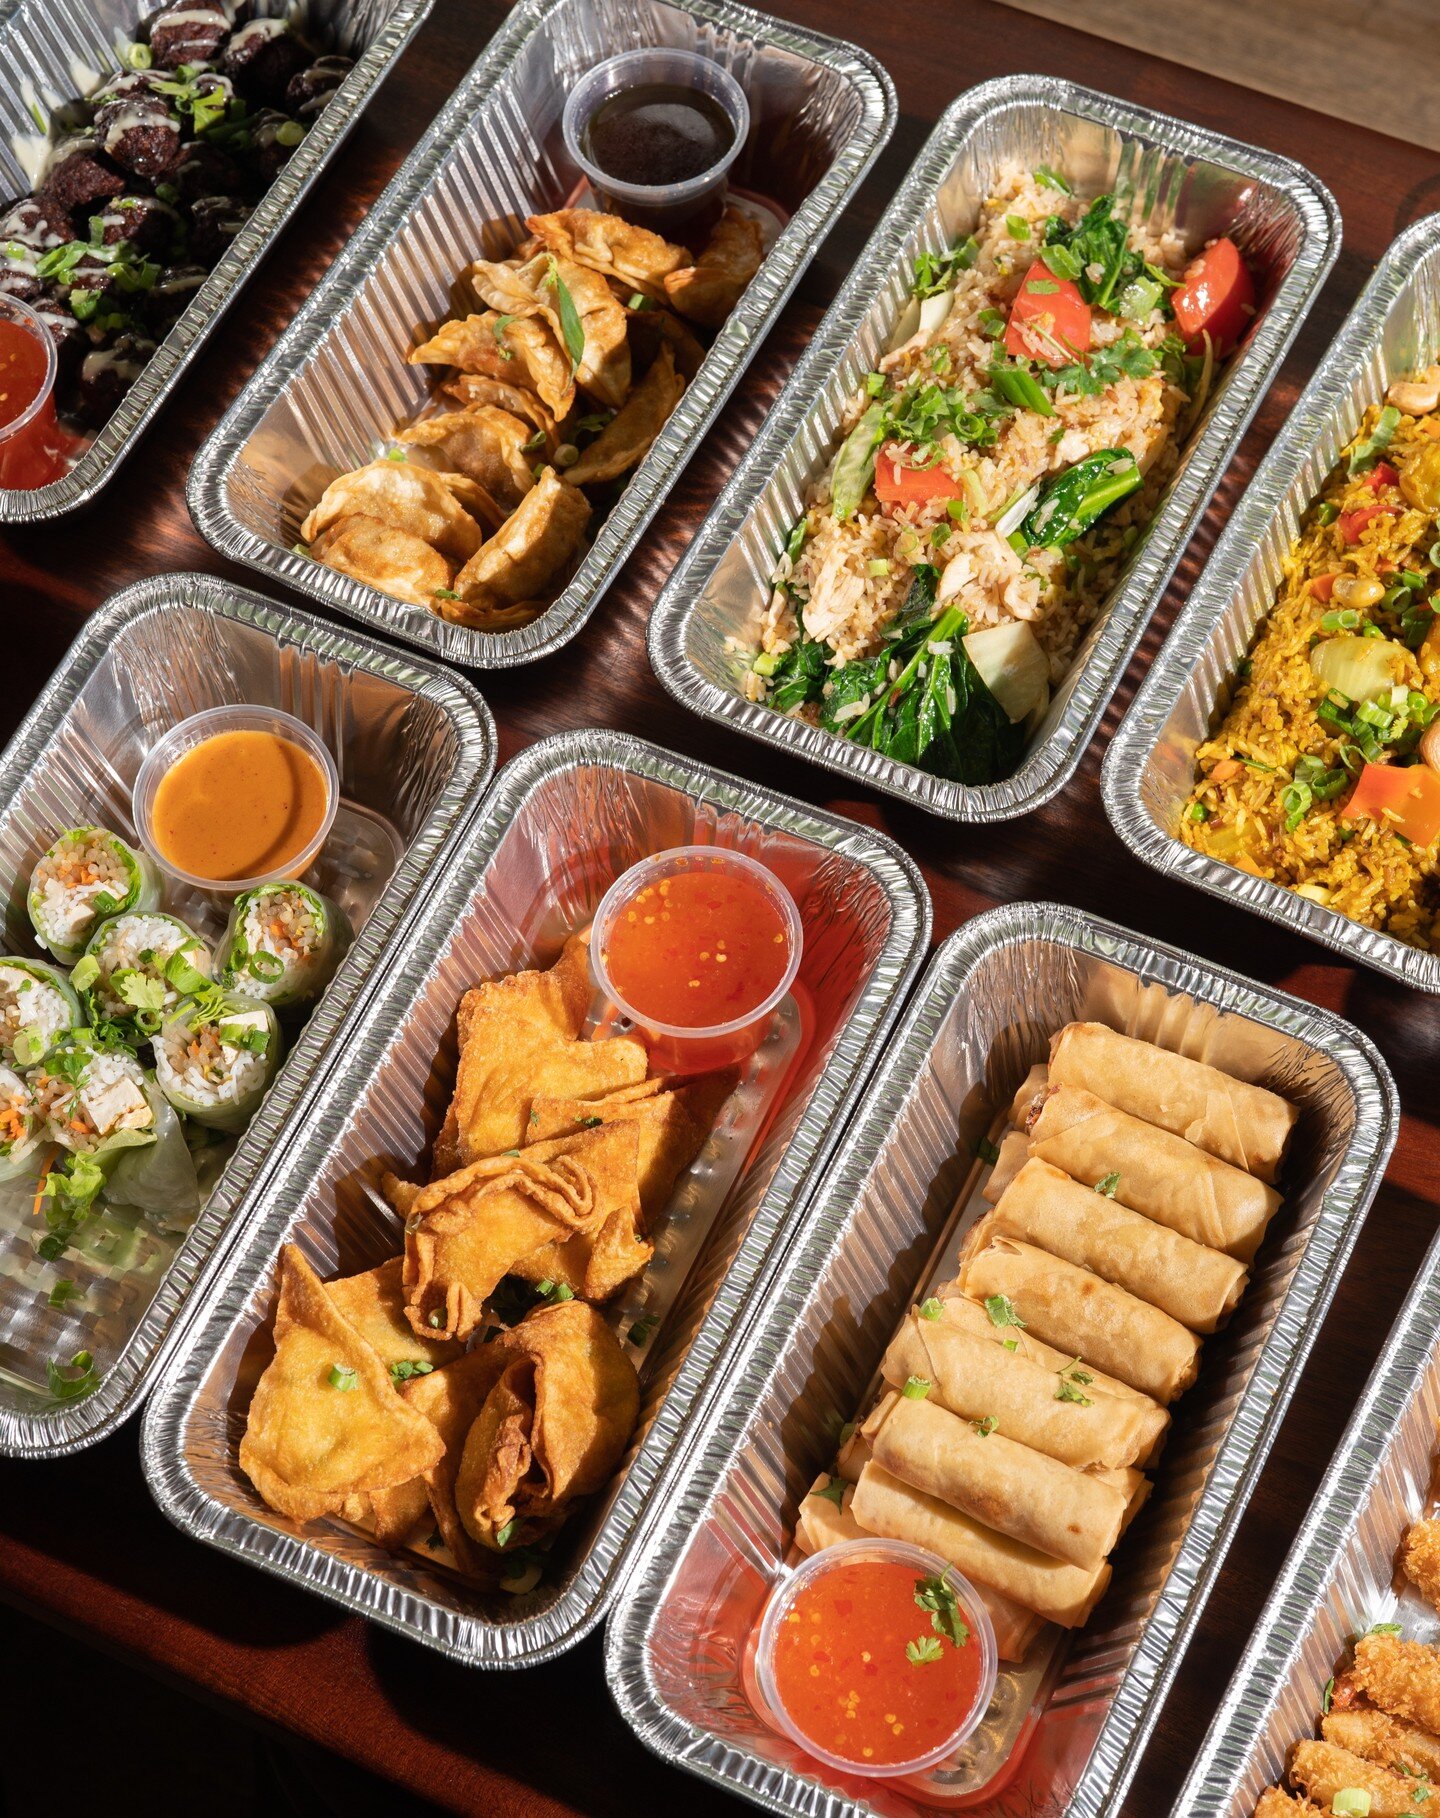 Our catering menu is available!!

Catering: www.thaipeacockpdx.com/catering

TO-GO / Delivery / Dinning
11A &ndash; Close

#thaipeacock #thaipeacockpdx #pdxdining #eeeeeats #portlandfood #thaifood #pdxeats #portlandfoodie #eater #eaterpdx #pdx #pdxno